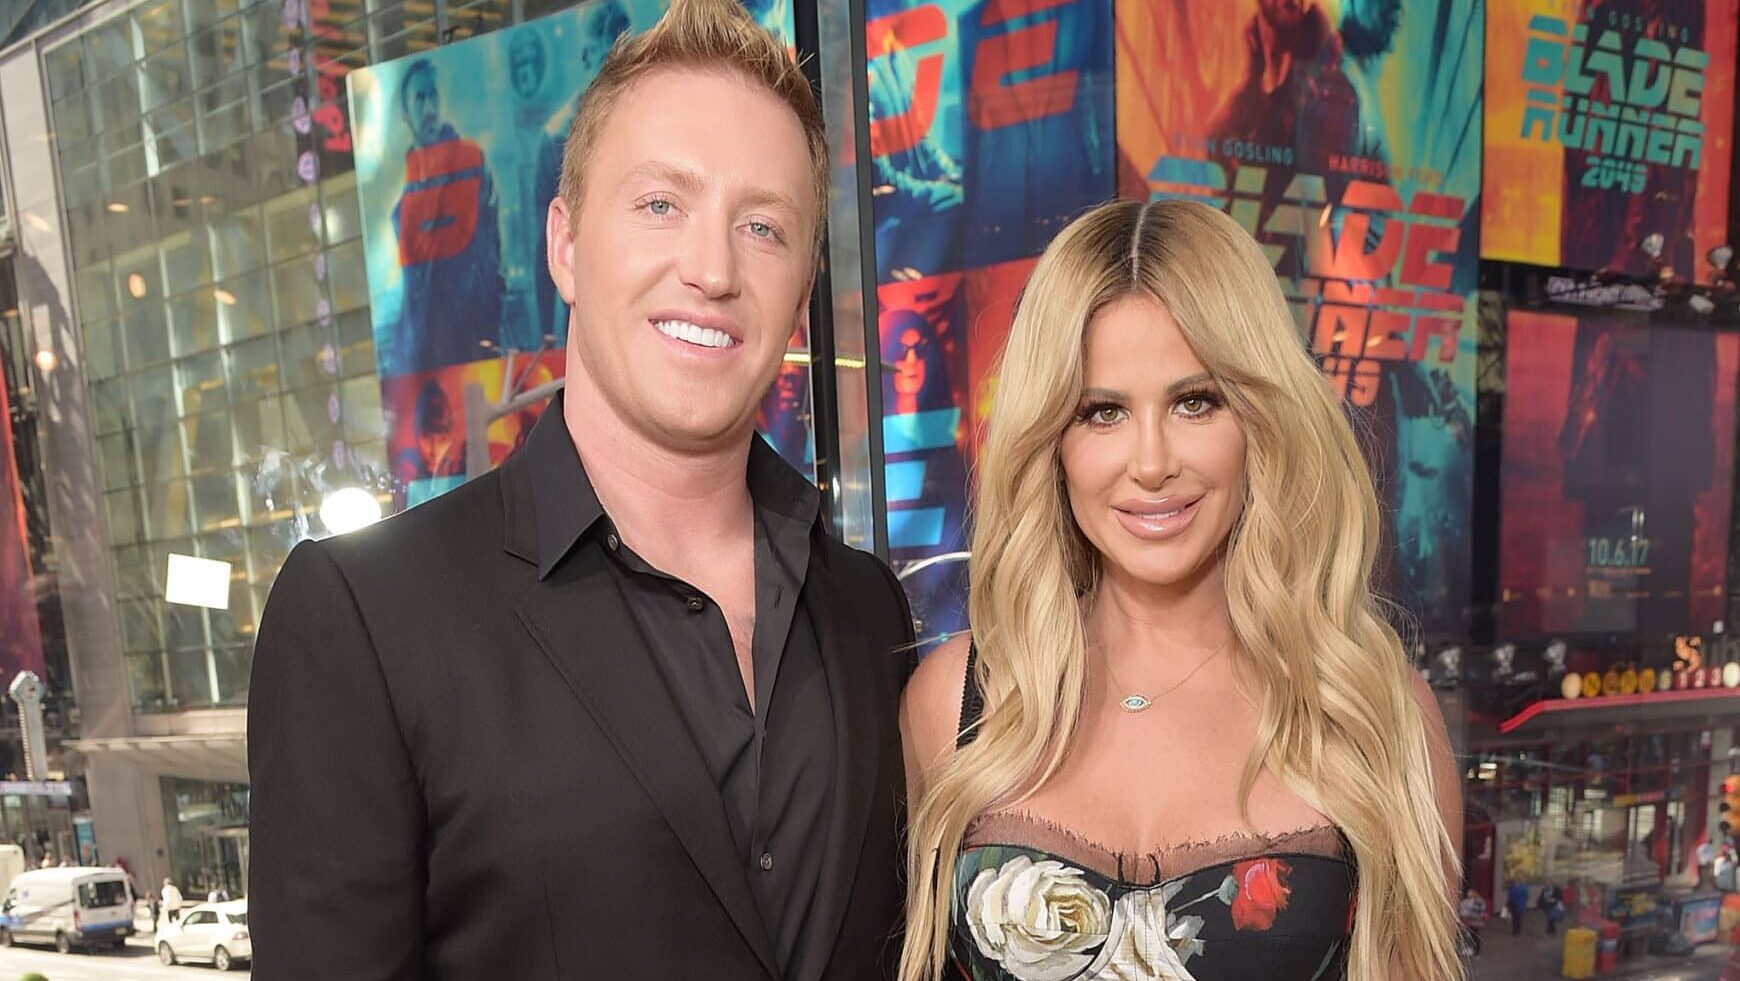 Kroy Biermann and television personality Kim Zolciak visit "Extra" at H&M Times Square on October 3, 2017 in New York City.